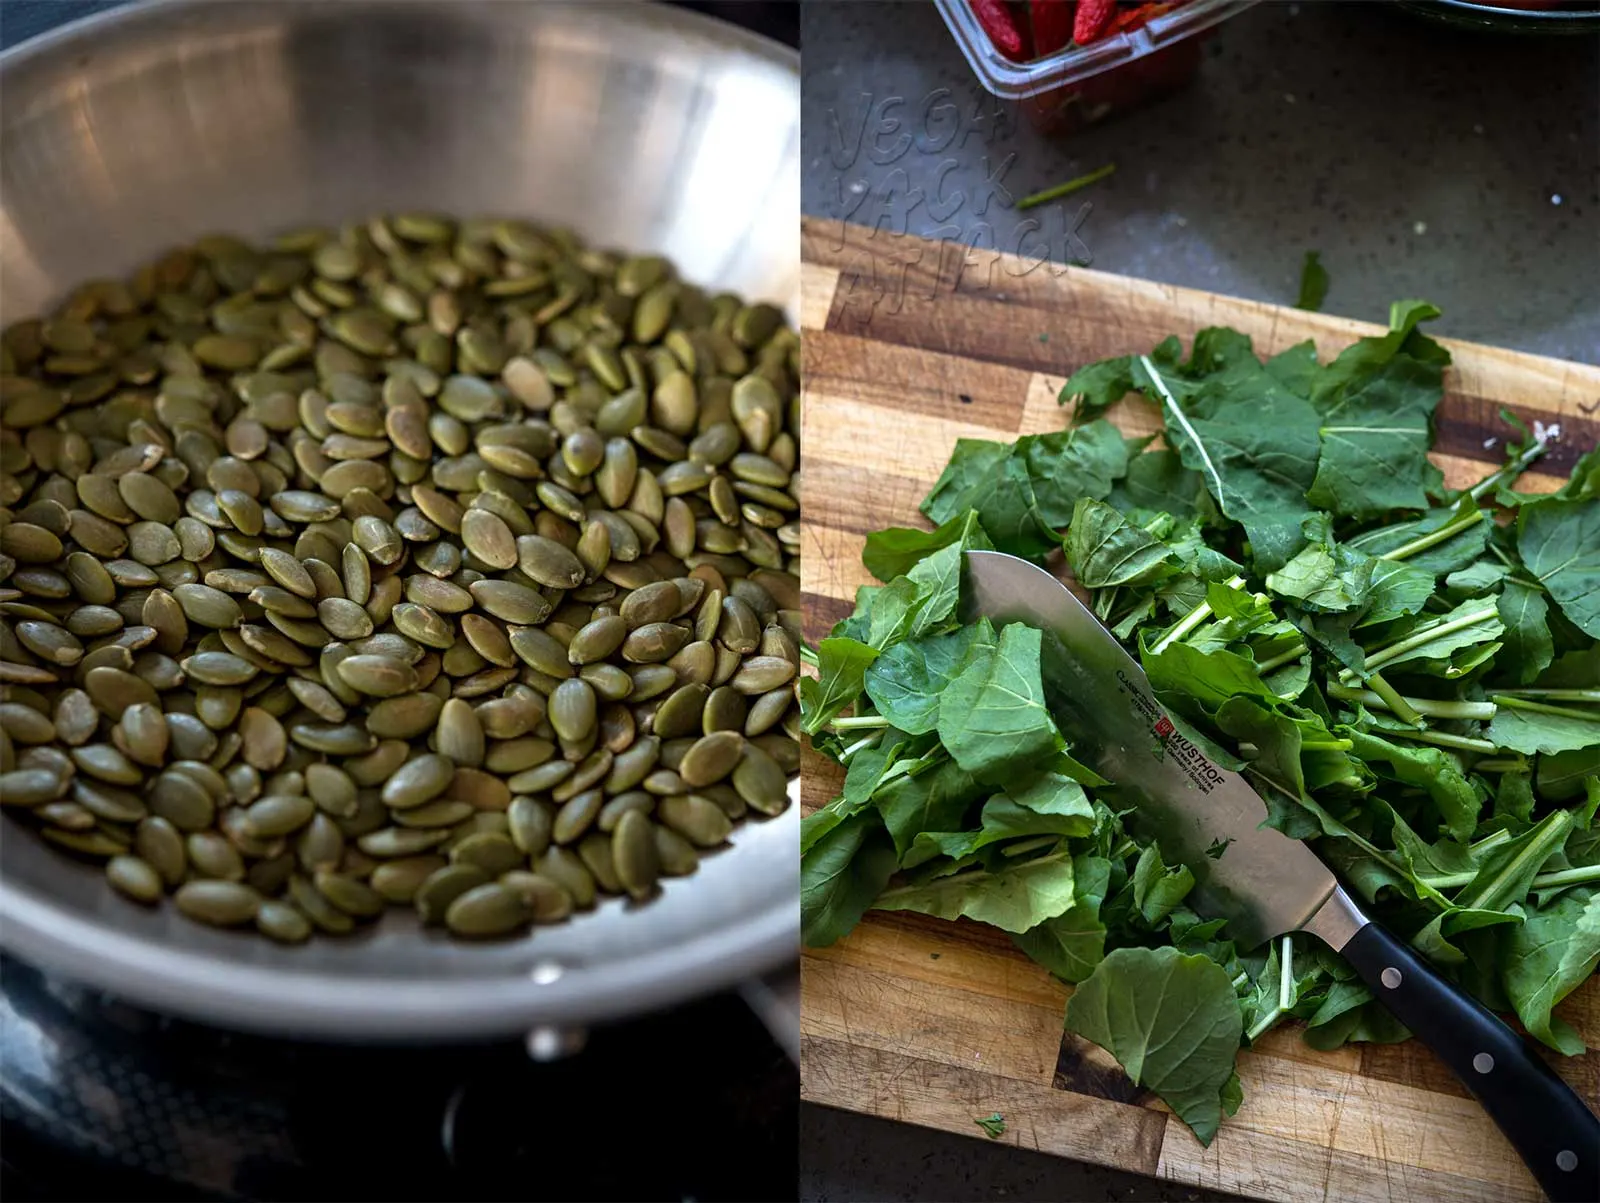 images of toasting pepitas in a pan, and chopping arugula